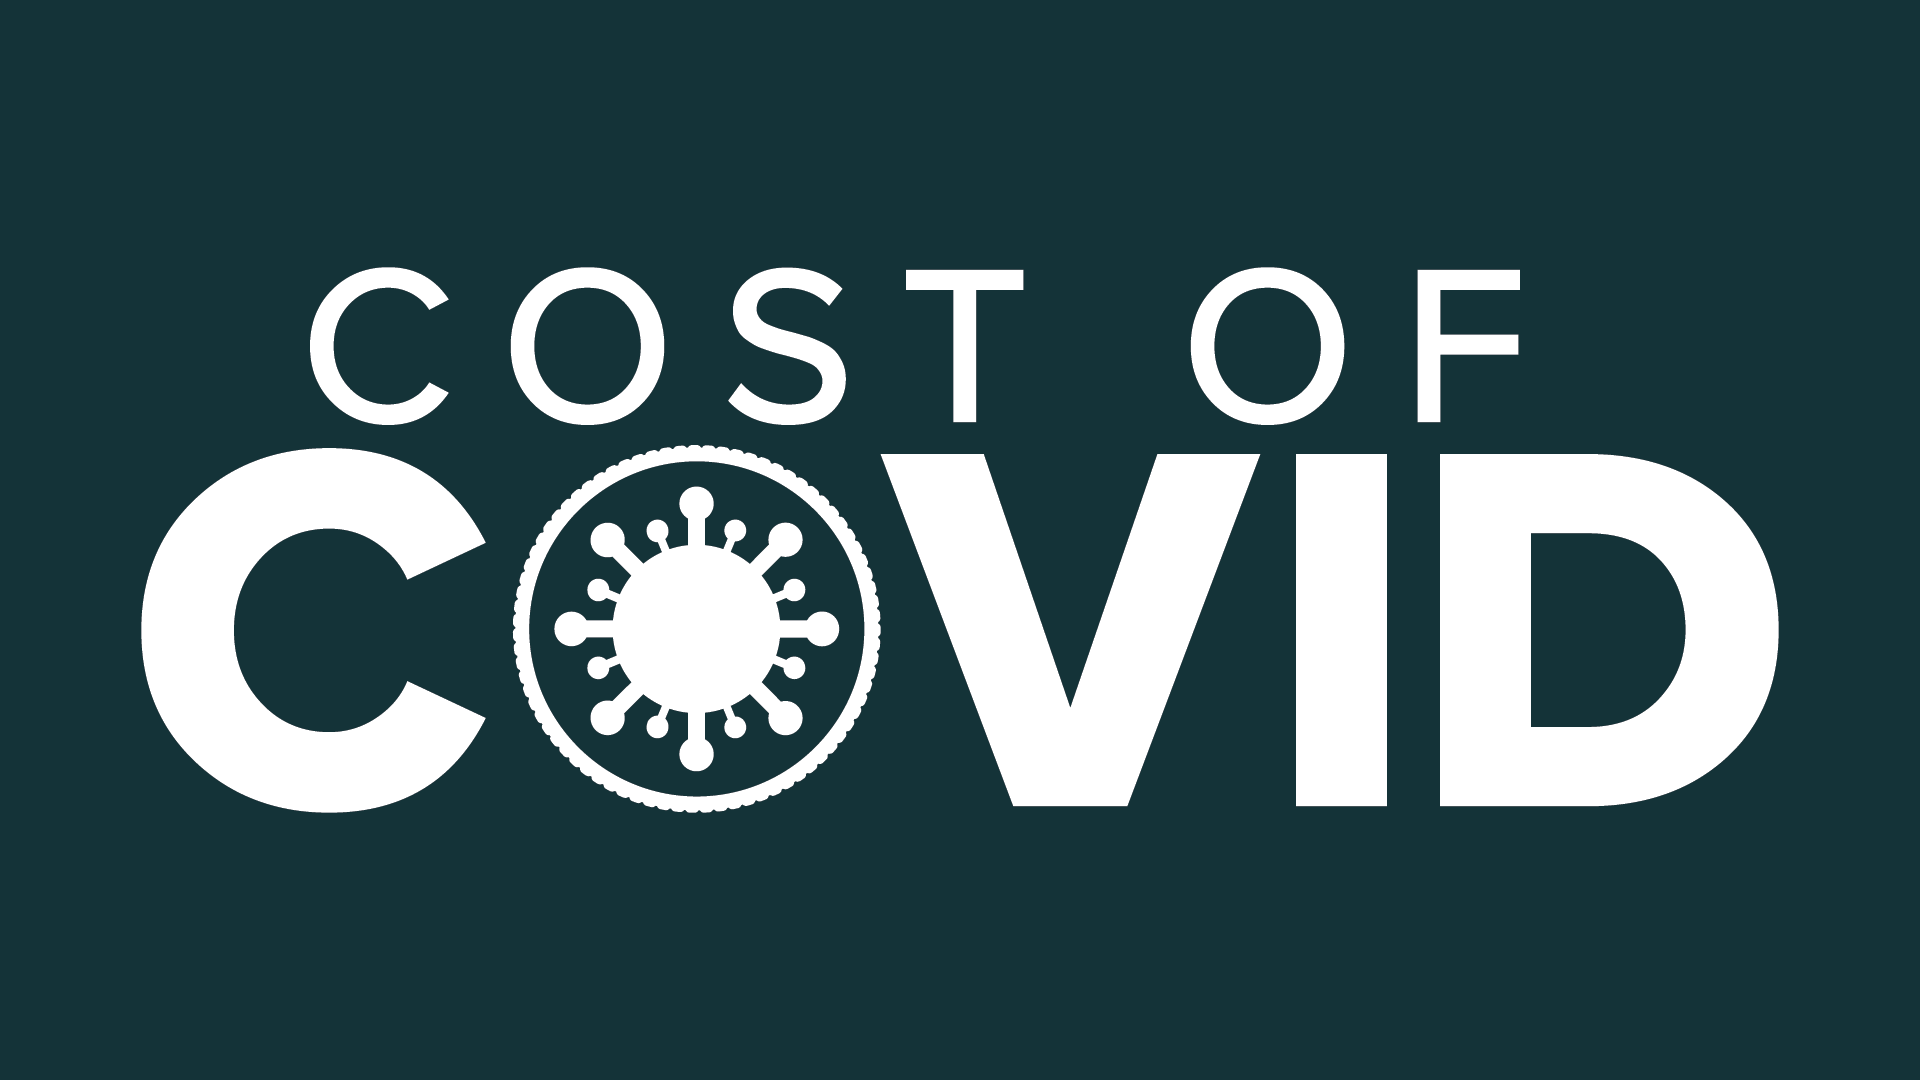 The Cost of COVID series will take a closer look at the impact of the pandemic on the lives of people living in Central Georgia